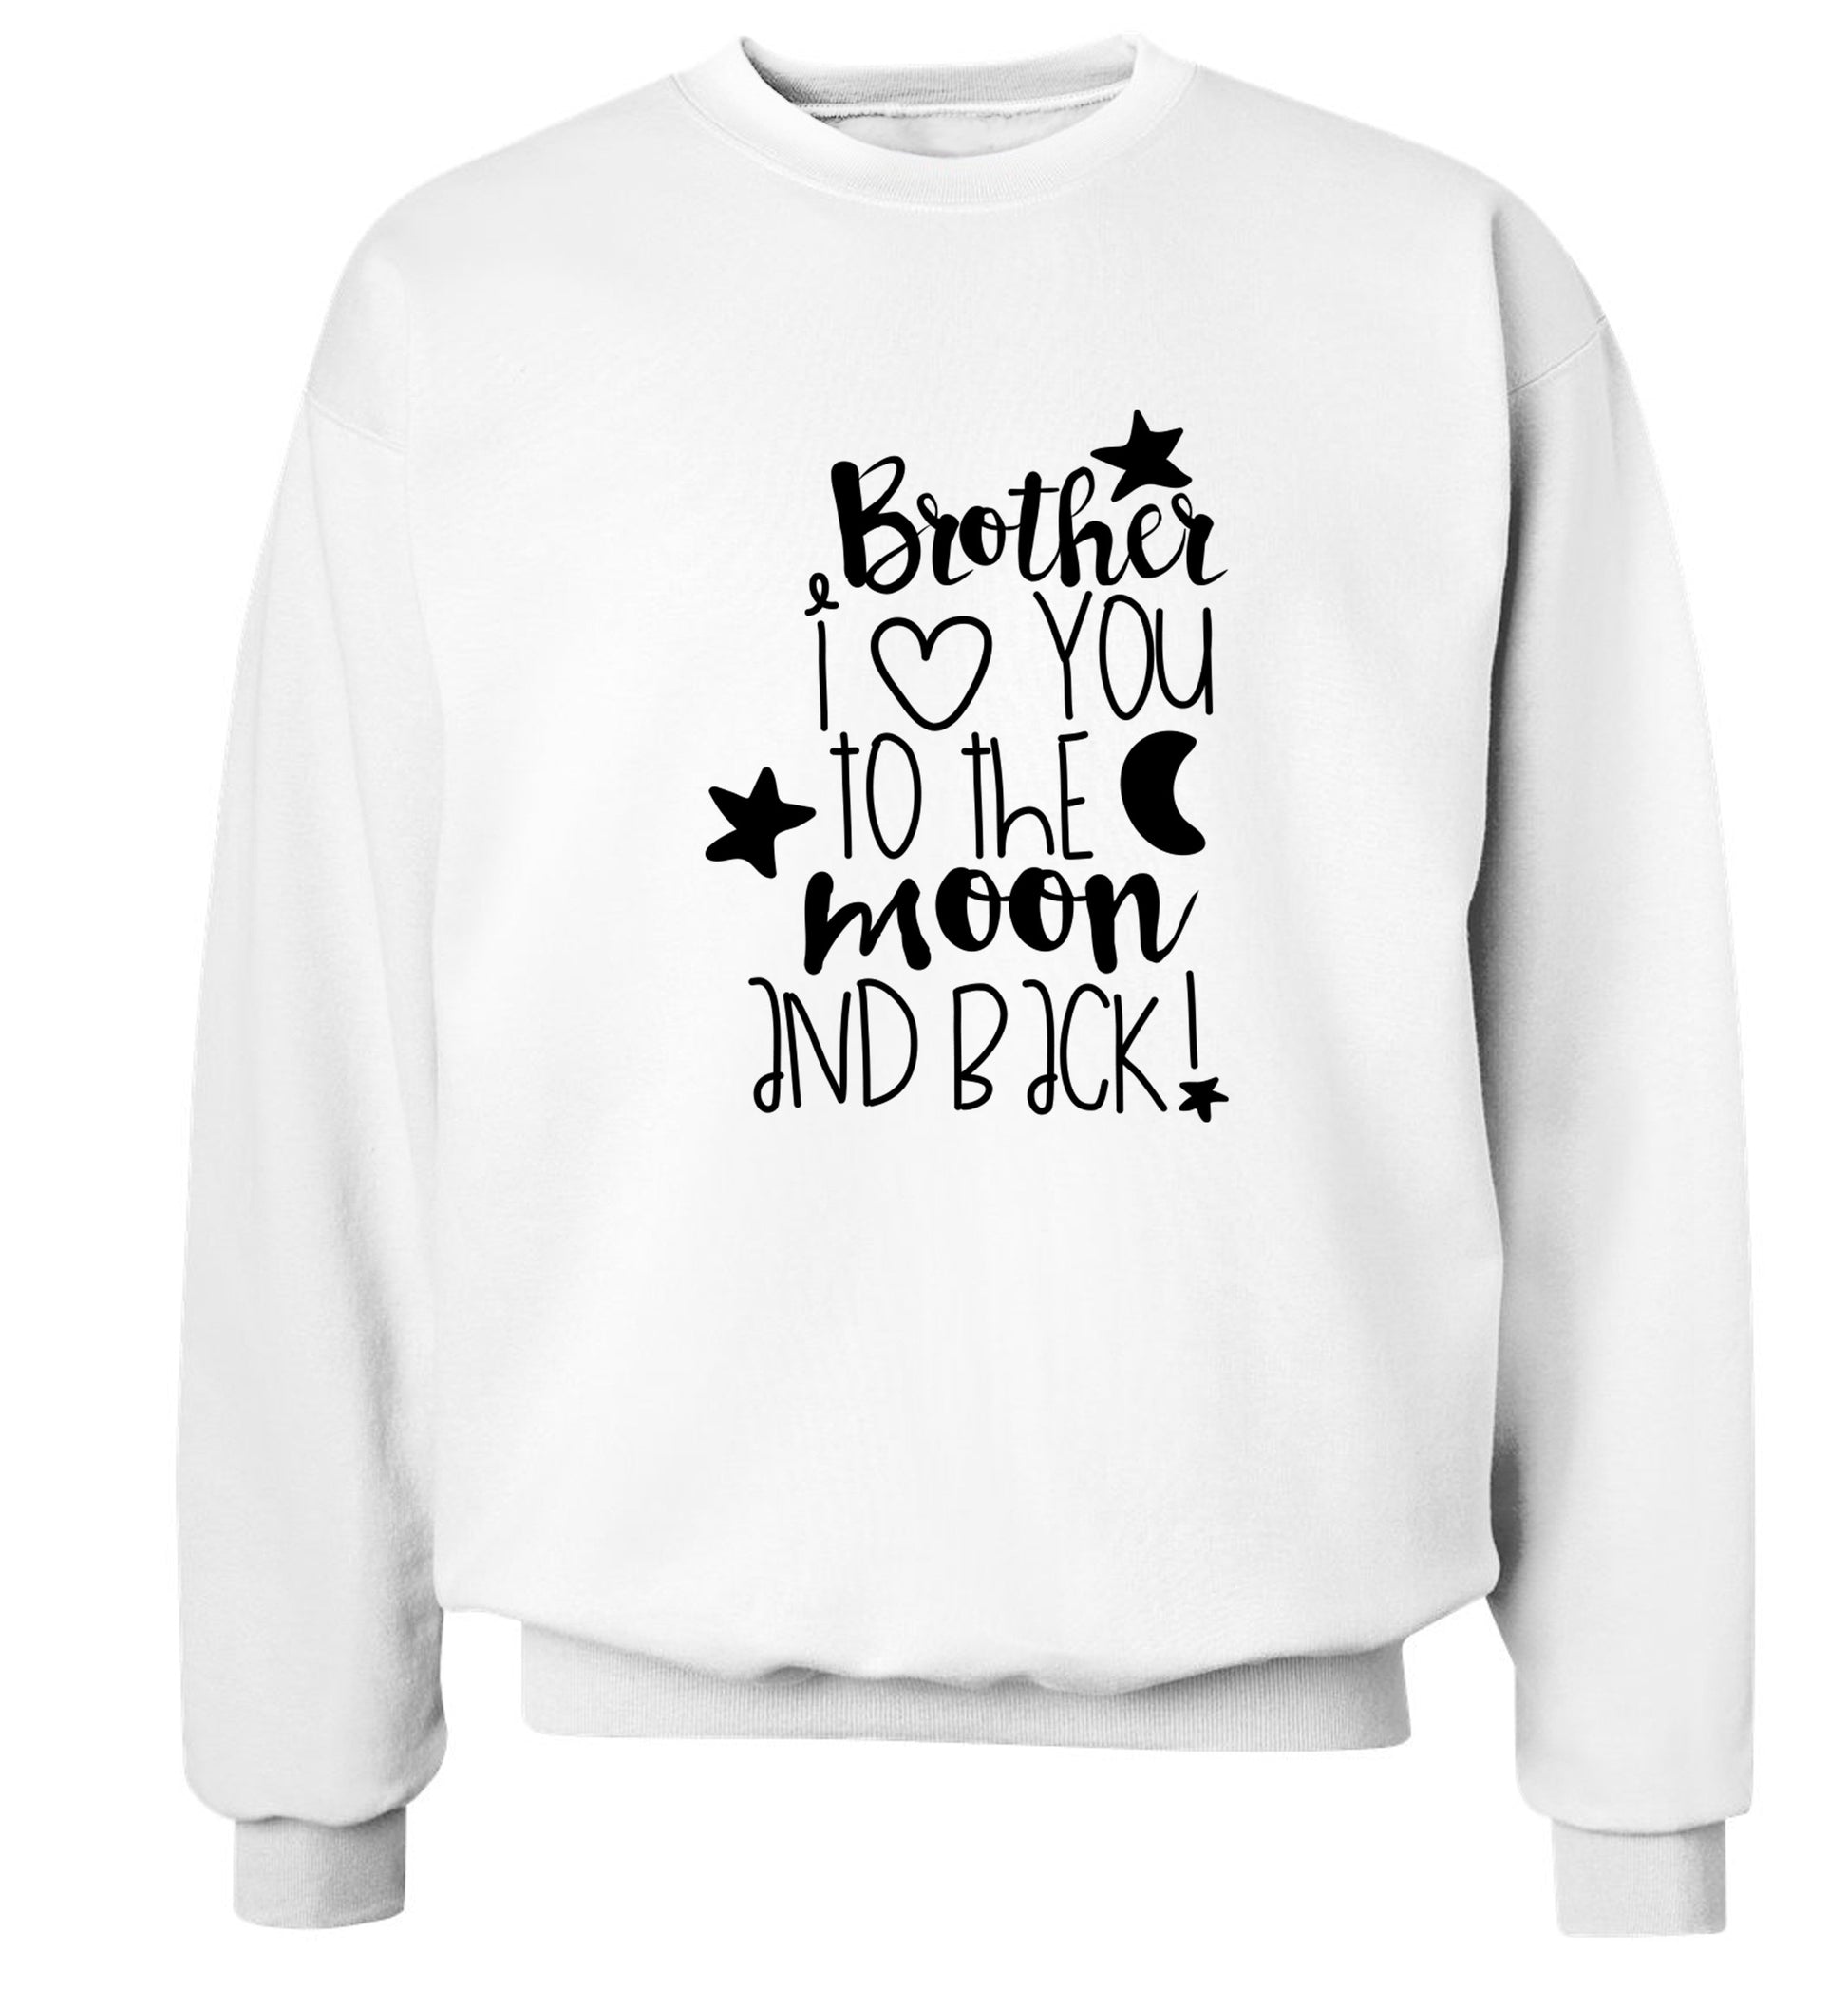 Brother I love you to the moon and back Adult's unisex white  sweater 2XL